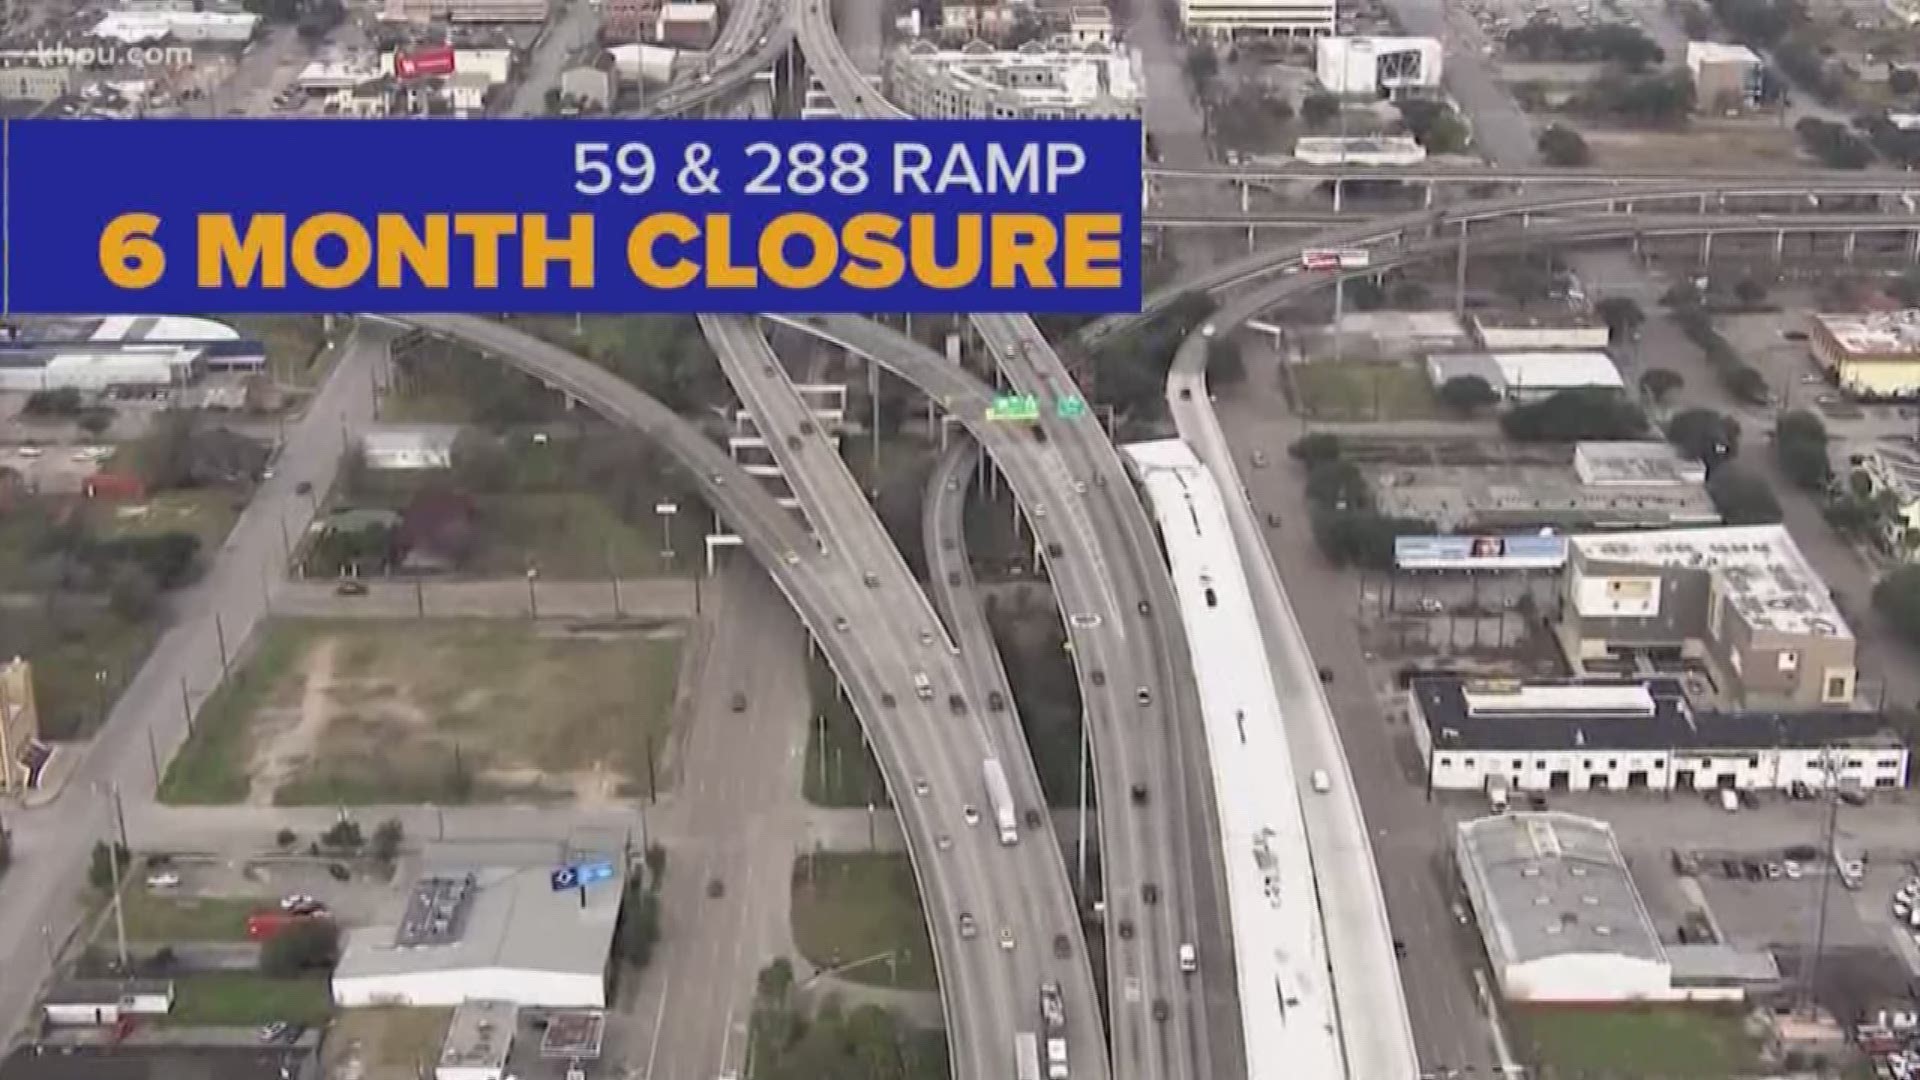 The Gulf Freeway ramp closure we've been talking about is just the beginning of what will be a very long headache on Houston roads. Our Rekha Muddaraj has the why behind the city's long-term construction plan.